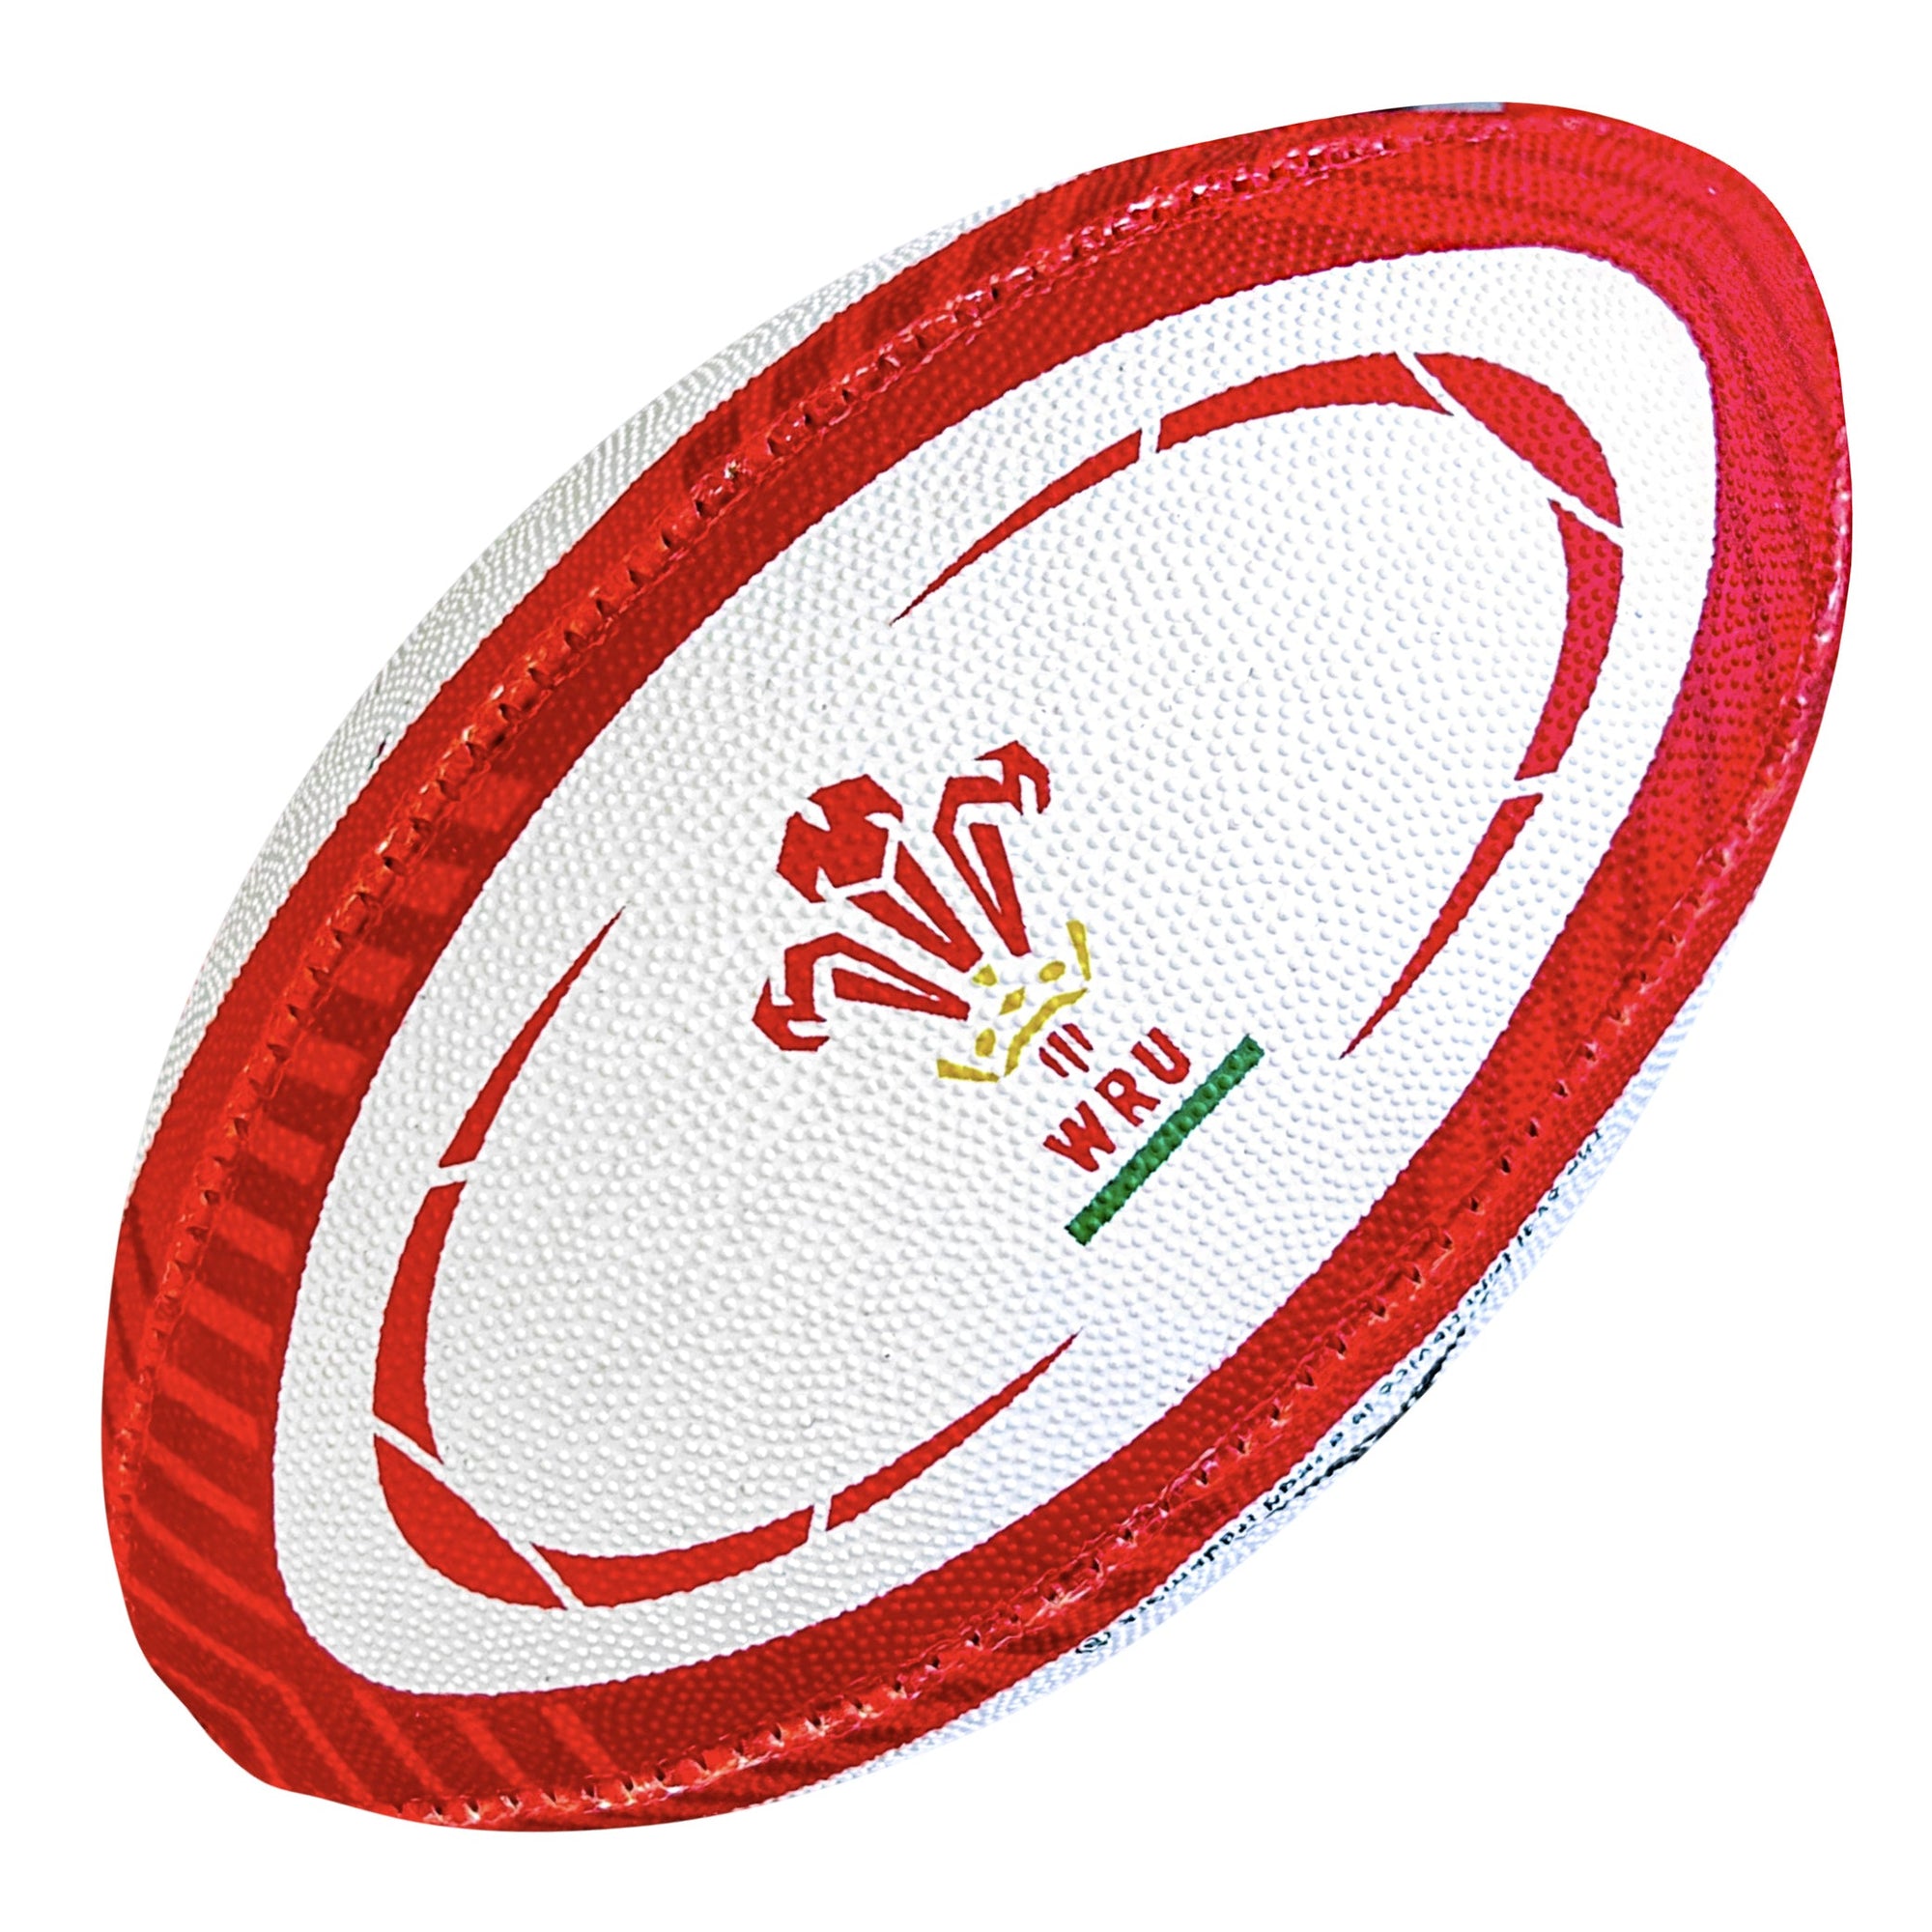 Rugby Imports Gilbert Wales Replica Mini Rugby Ball